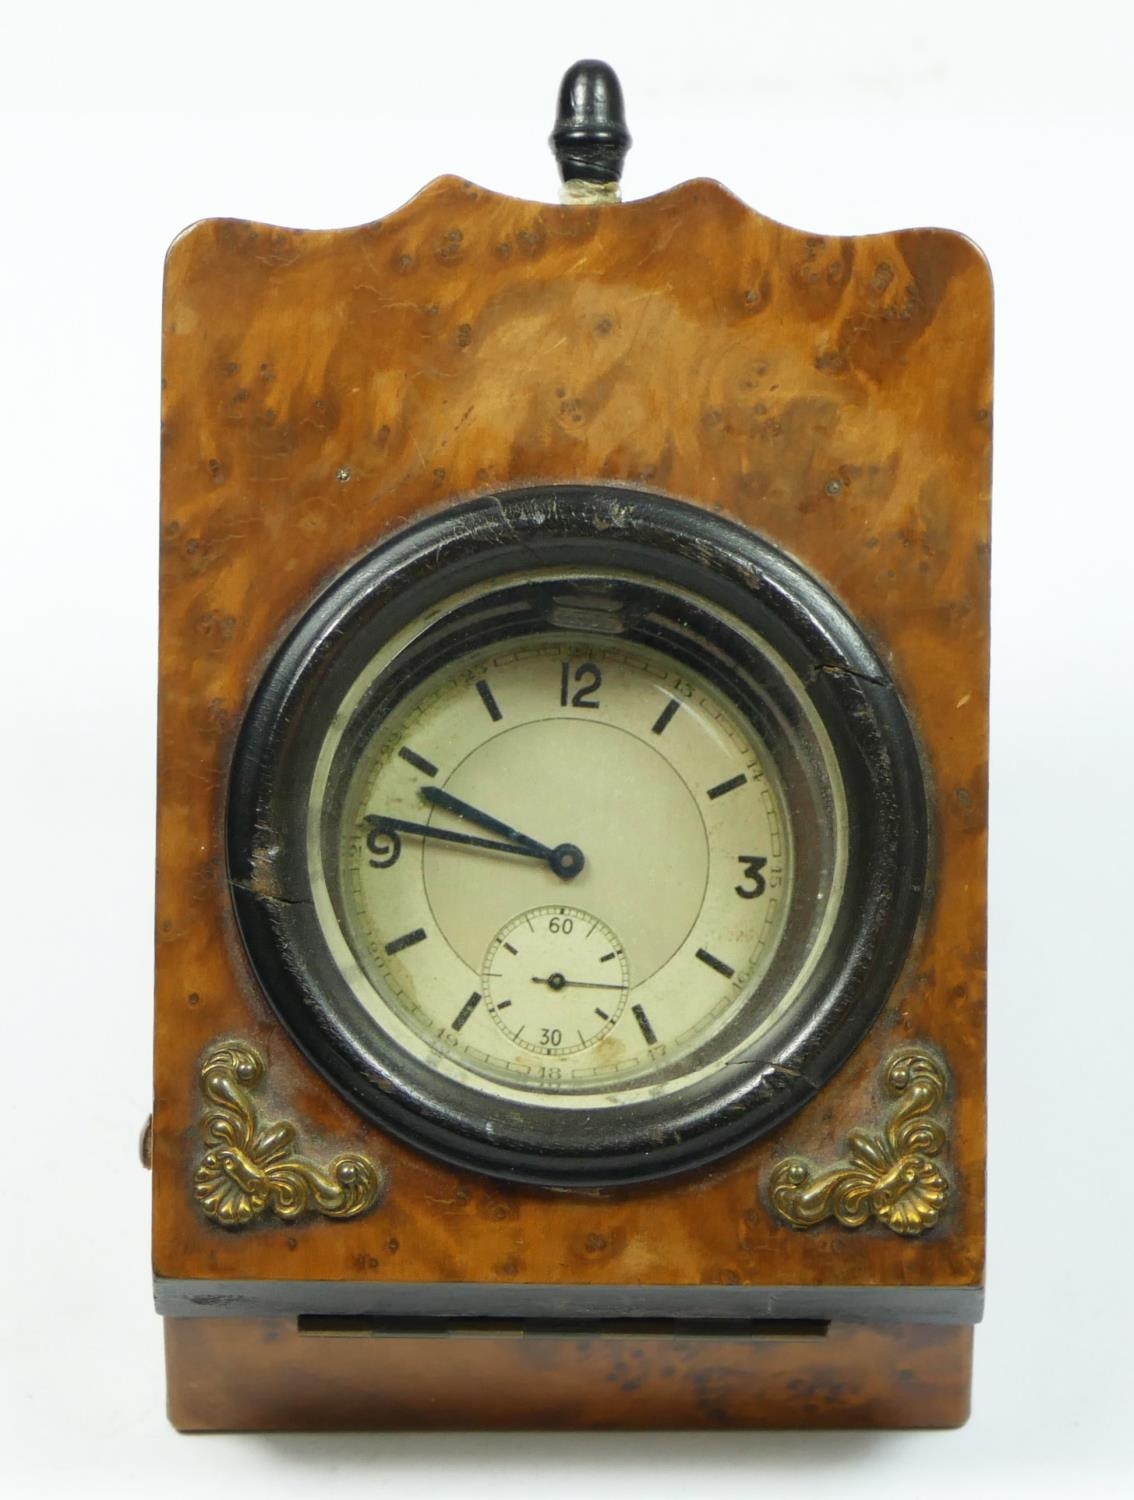 A 1940's chrome plated open face keyless wind pocket watch, contained in a burr walnut desk case.